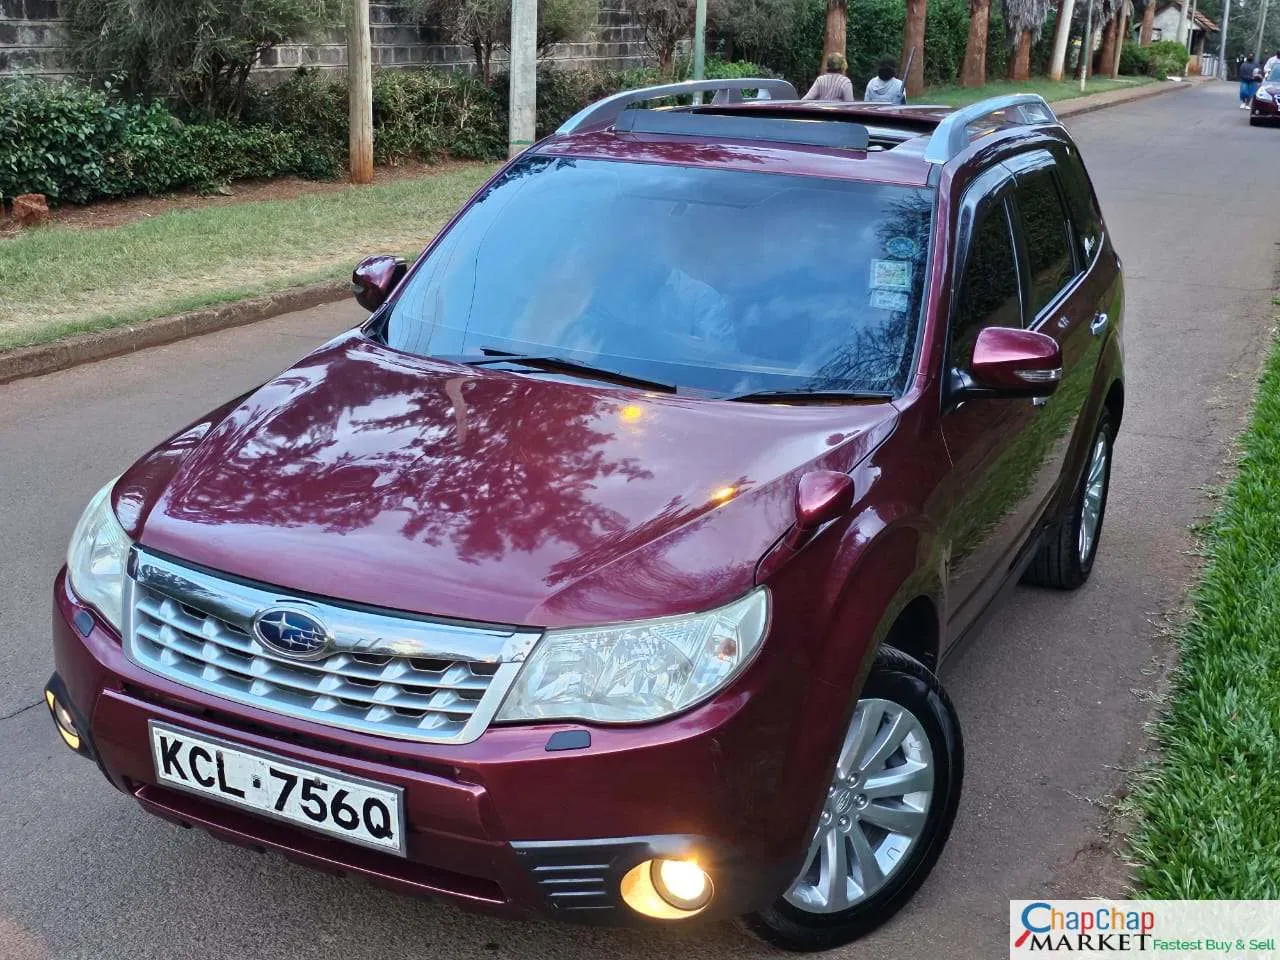 Subaru Forester for sale in kenya hire purchase installments You Pay 30% deposit Trade in Ok Forester kenya EXCLUSIVE (SOLD)